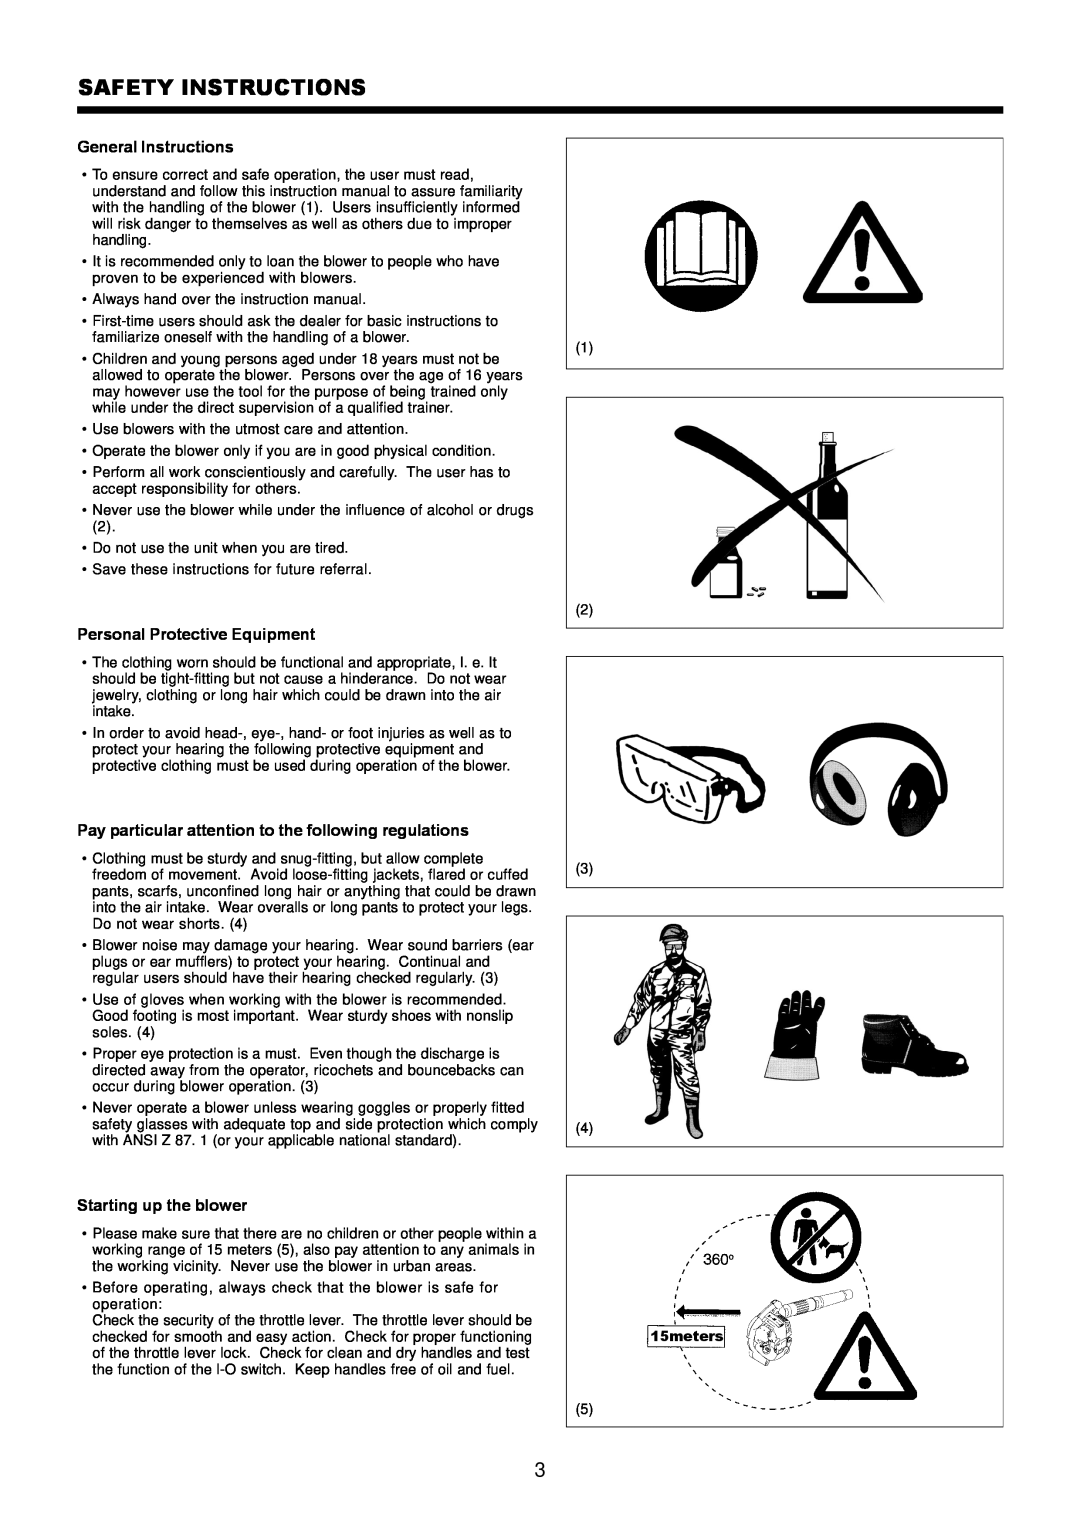 Dolmar PB-250.4 Safety Instructions, General Instructions, Personal Protective Equipment, Starting up the blower, 15meters 